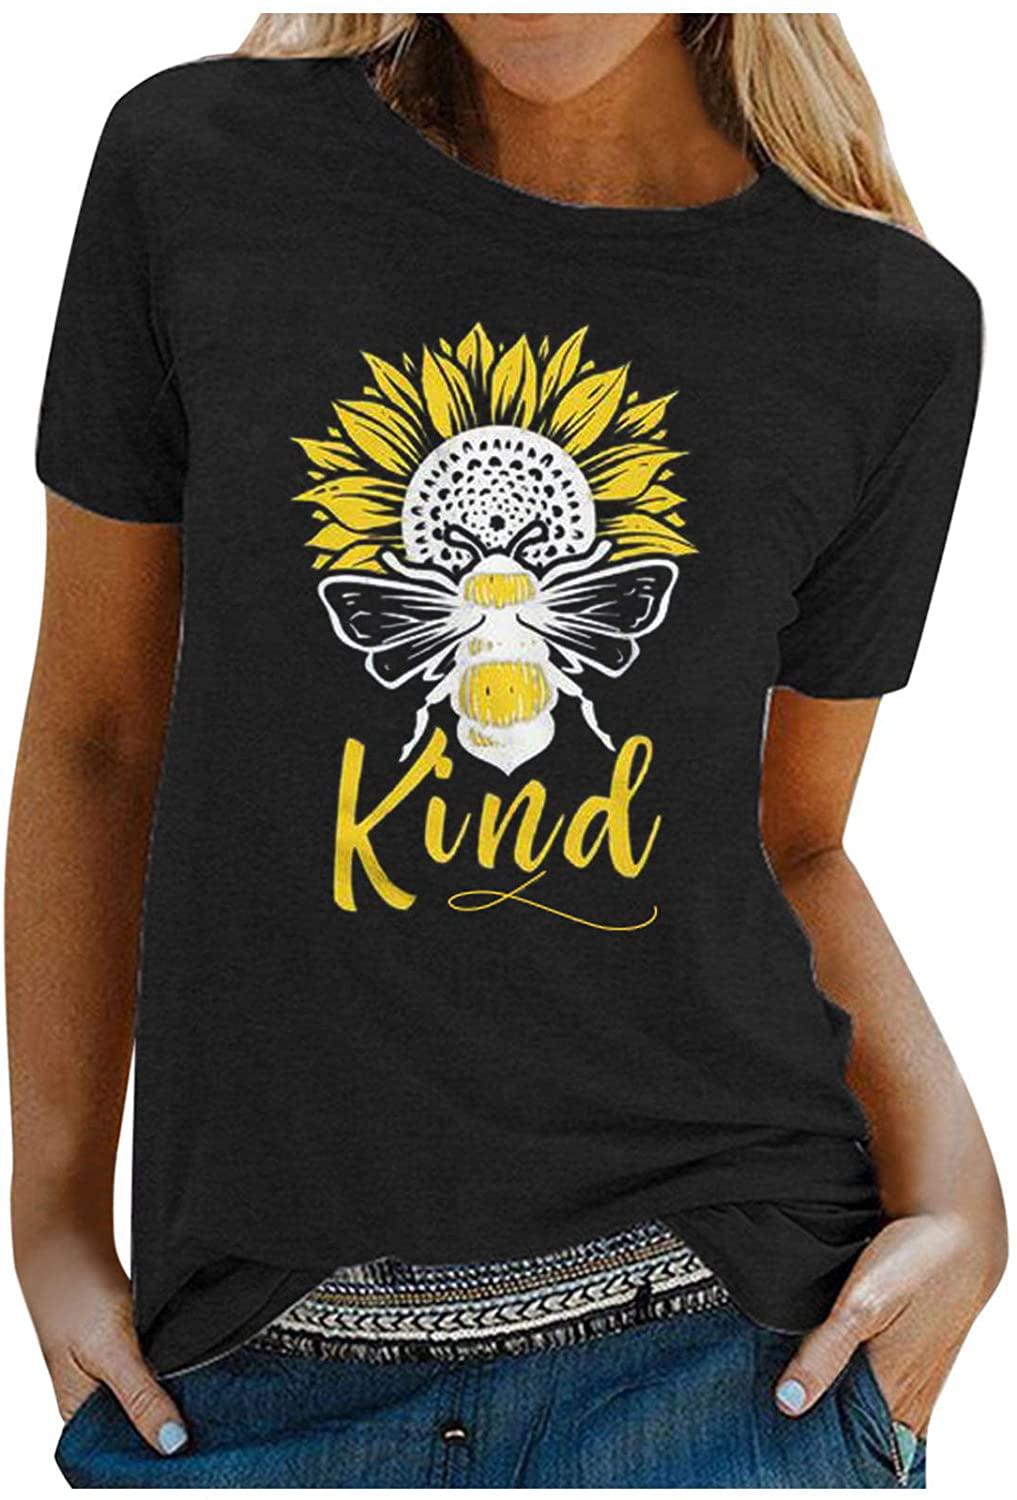 Tshirts Women Sunflower Graphic Funny Tee Shirts Summer Short Sleeve Top Casual Loose Tunic Blouse Tops 